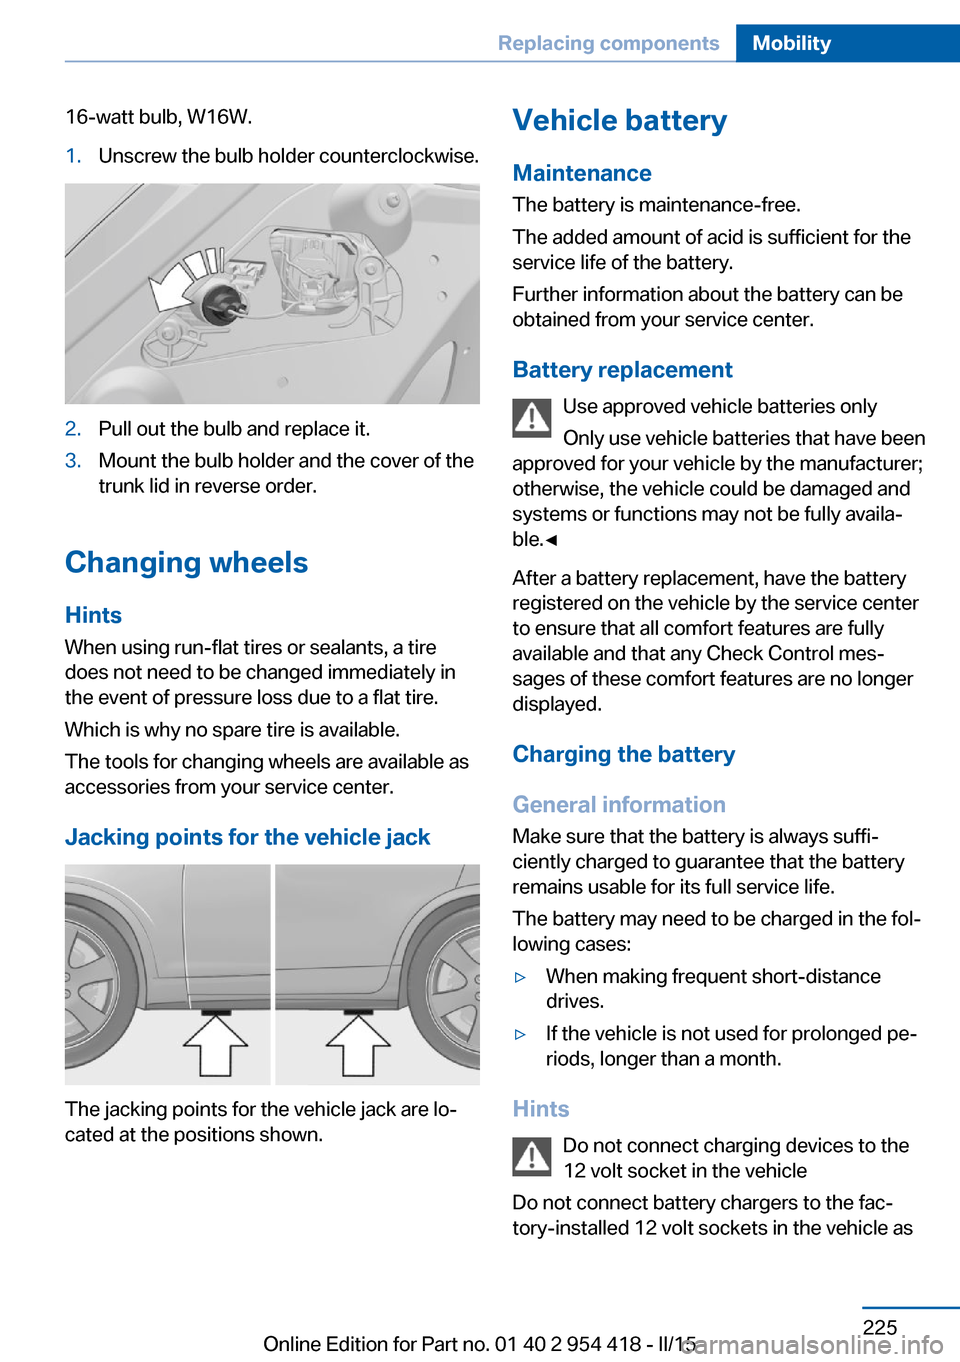 BMW 6 SERIES CONVERTIBLE 2015 F12 Owners Manual 16-watt bulb, W16W.1.Unscrew the bulb holder counterclockwise.2.Pull out the bulb and replace it.3.Mount the bulb holder and the cover of the
trunk lid in reverse order.
Changing wheels
Hints
When usi